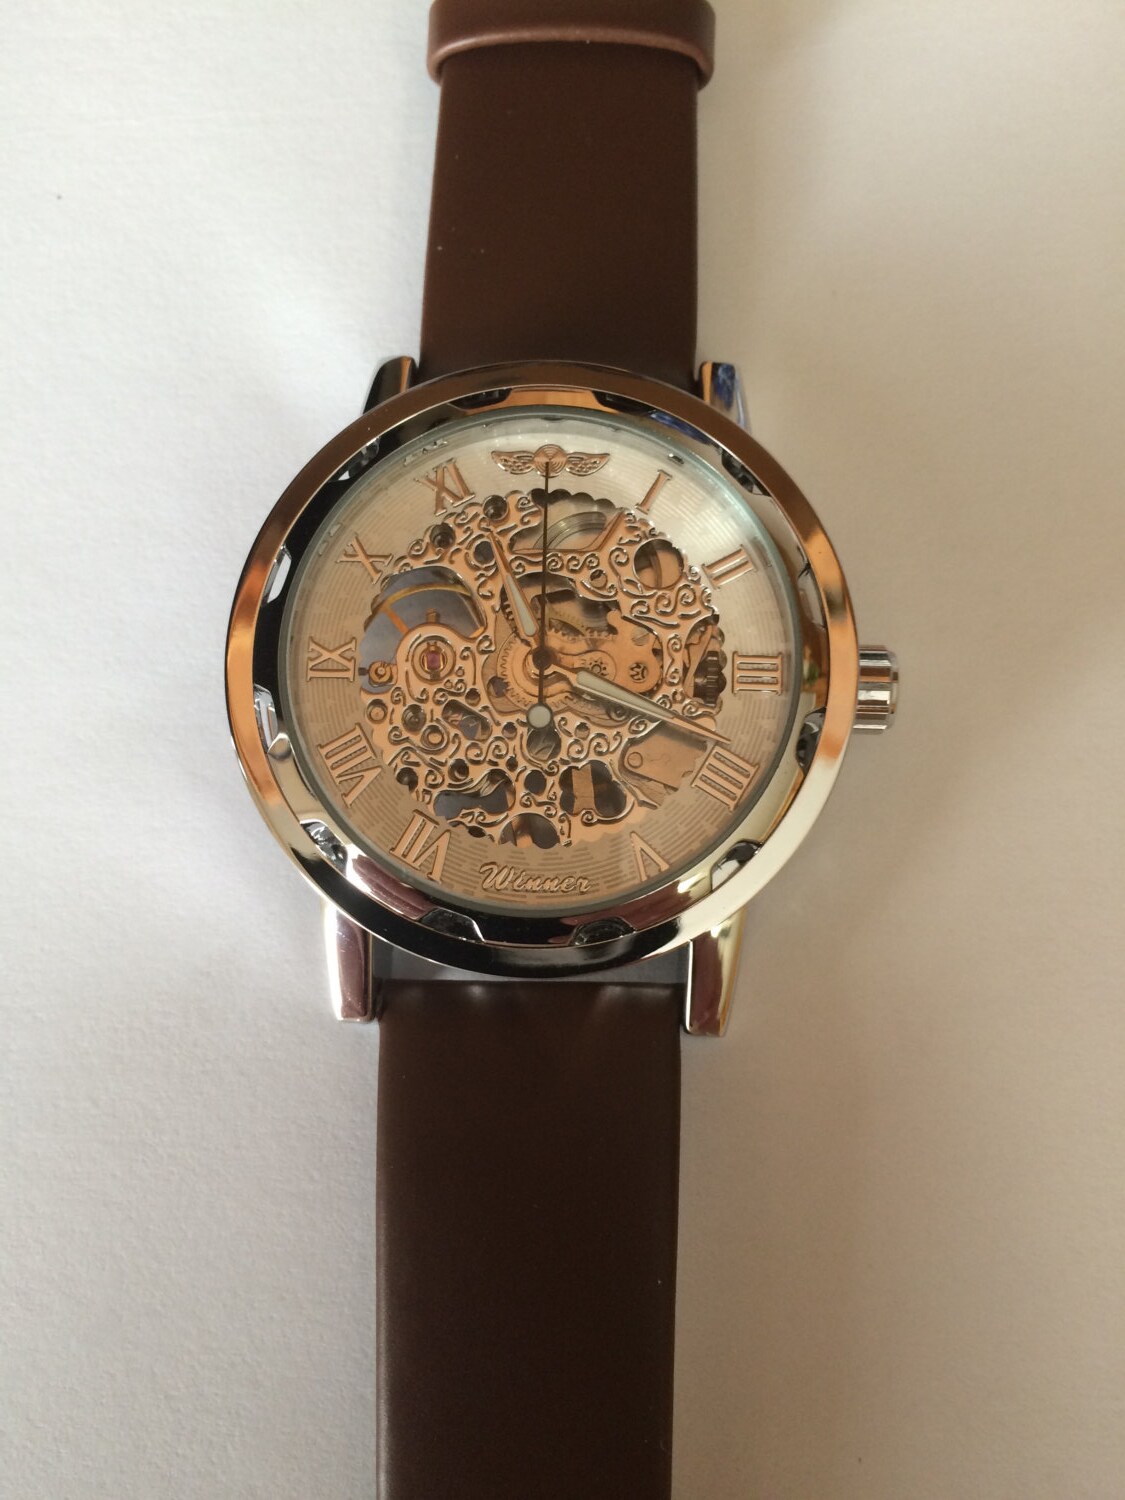 Men's Steampunk Mechanical Skeleton Wrist Watch with White Face and Brown Leather Watch Band -Groomsmen and Wedding Gift